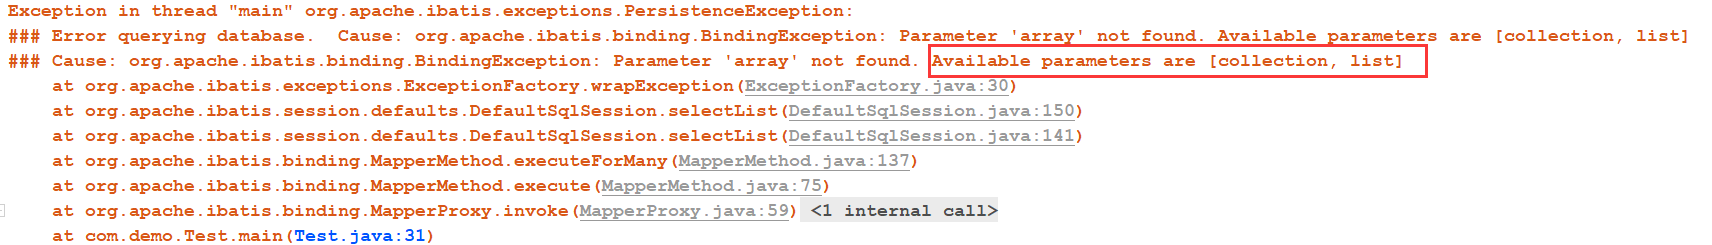 Mybatis使用动态SQL时报错“Parameter ‘array‘ not found. Available parameters are [collection, list]“